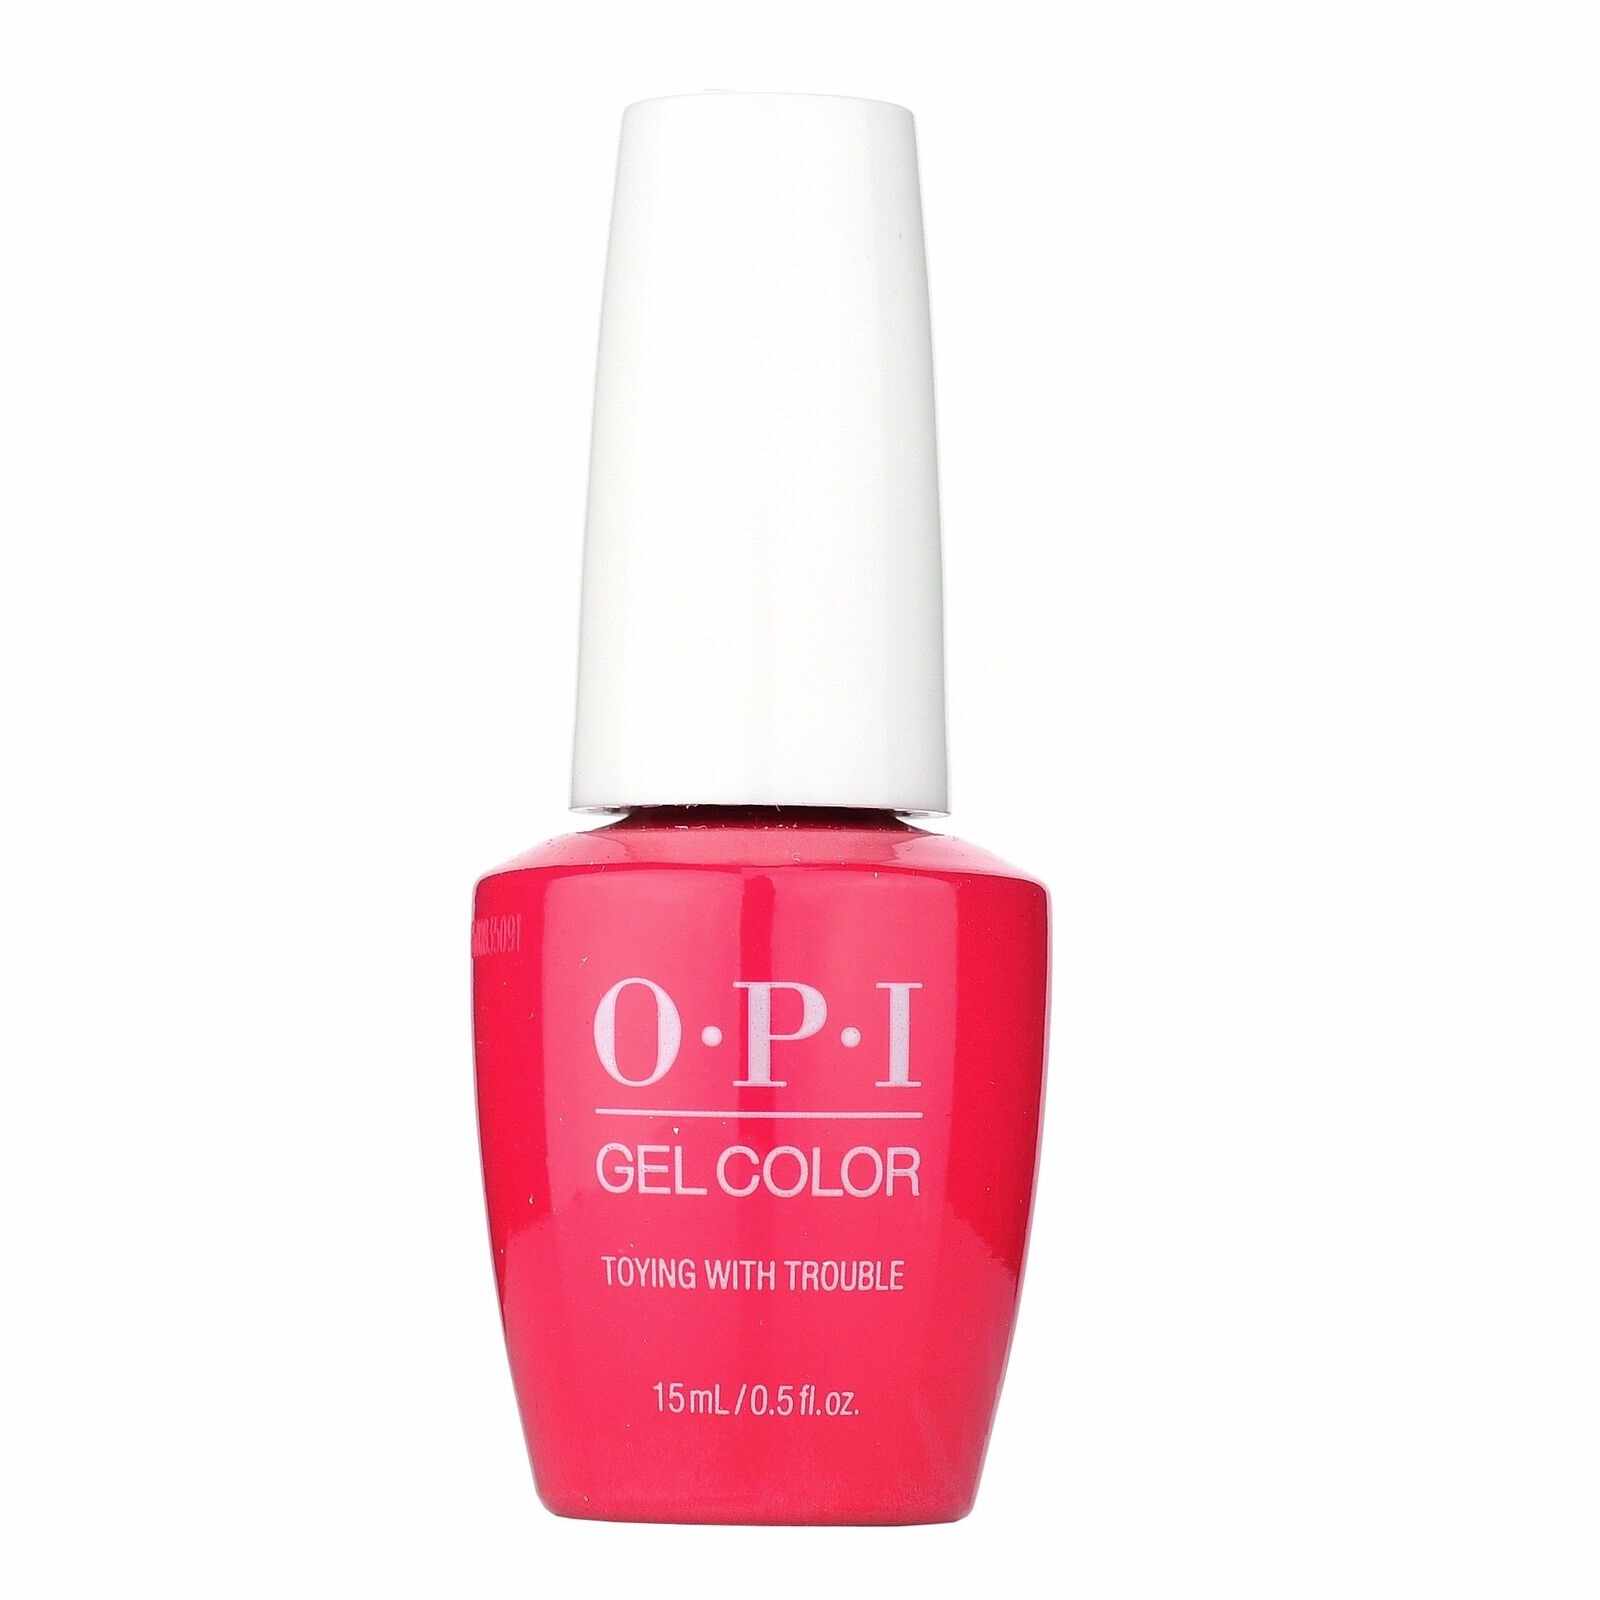 Lac de unghii semipermanent OPI Gel Color Toying With Trouble, 15ml